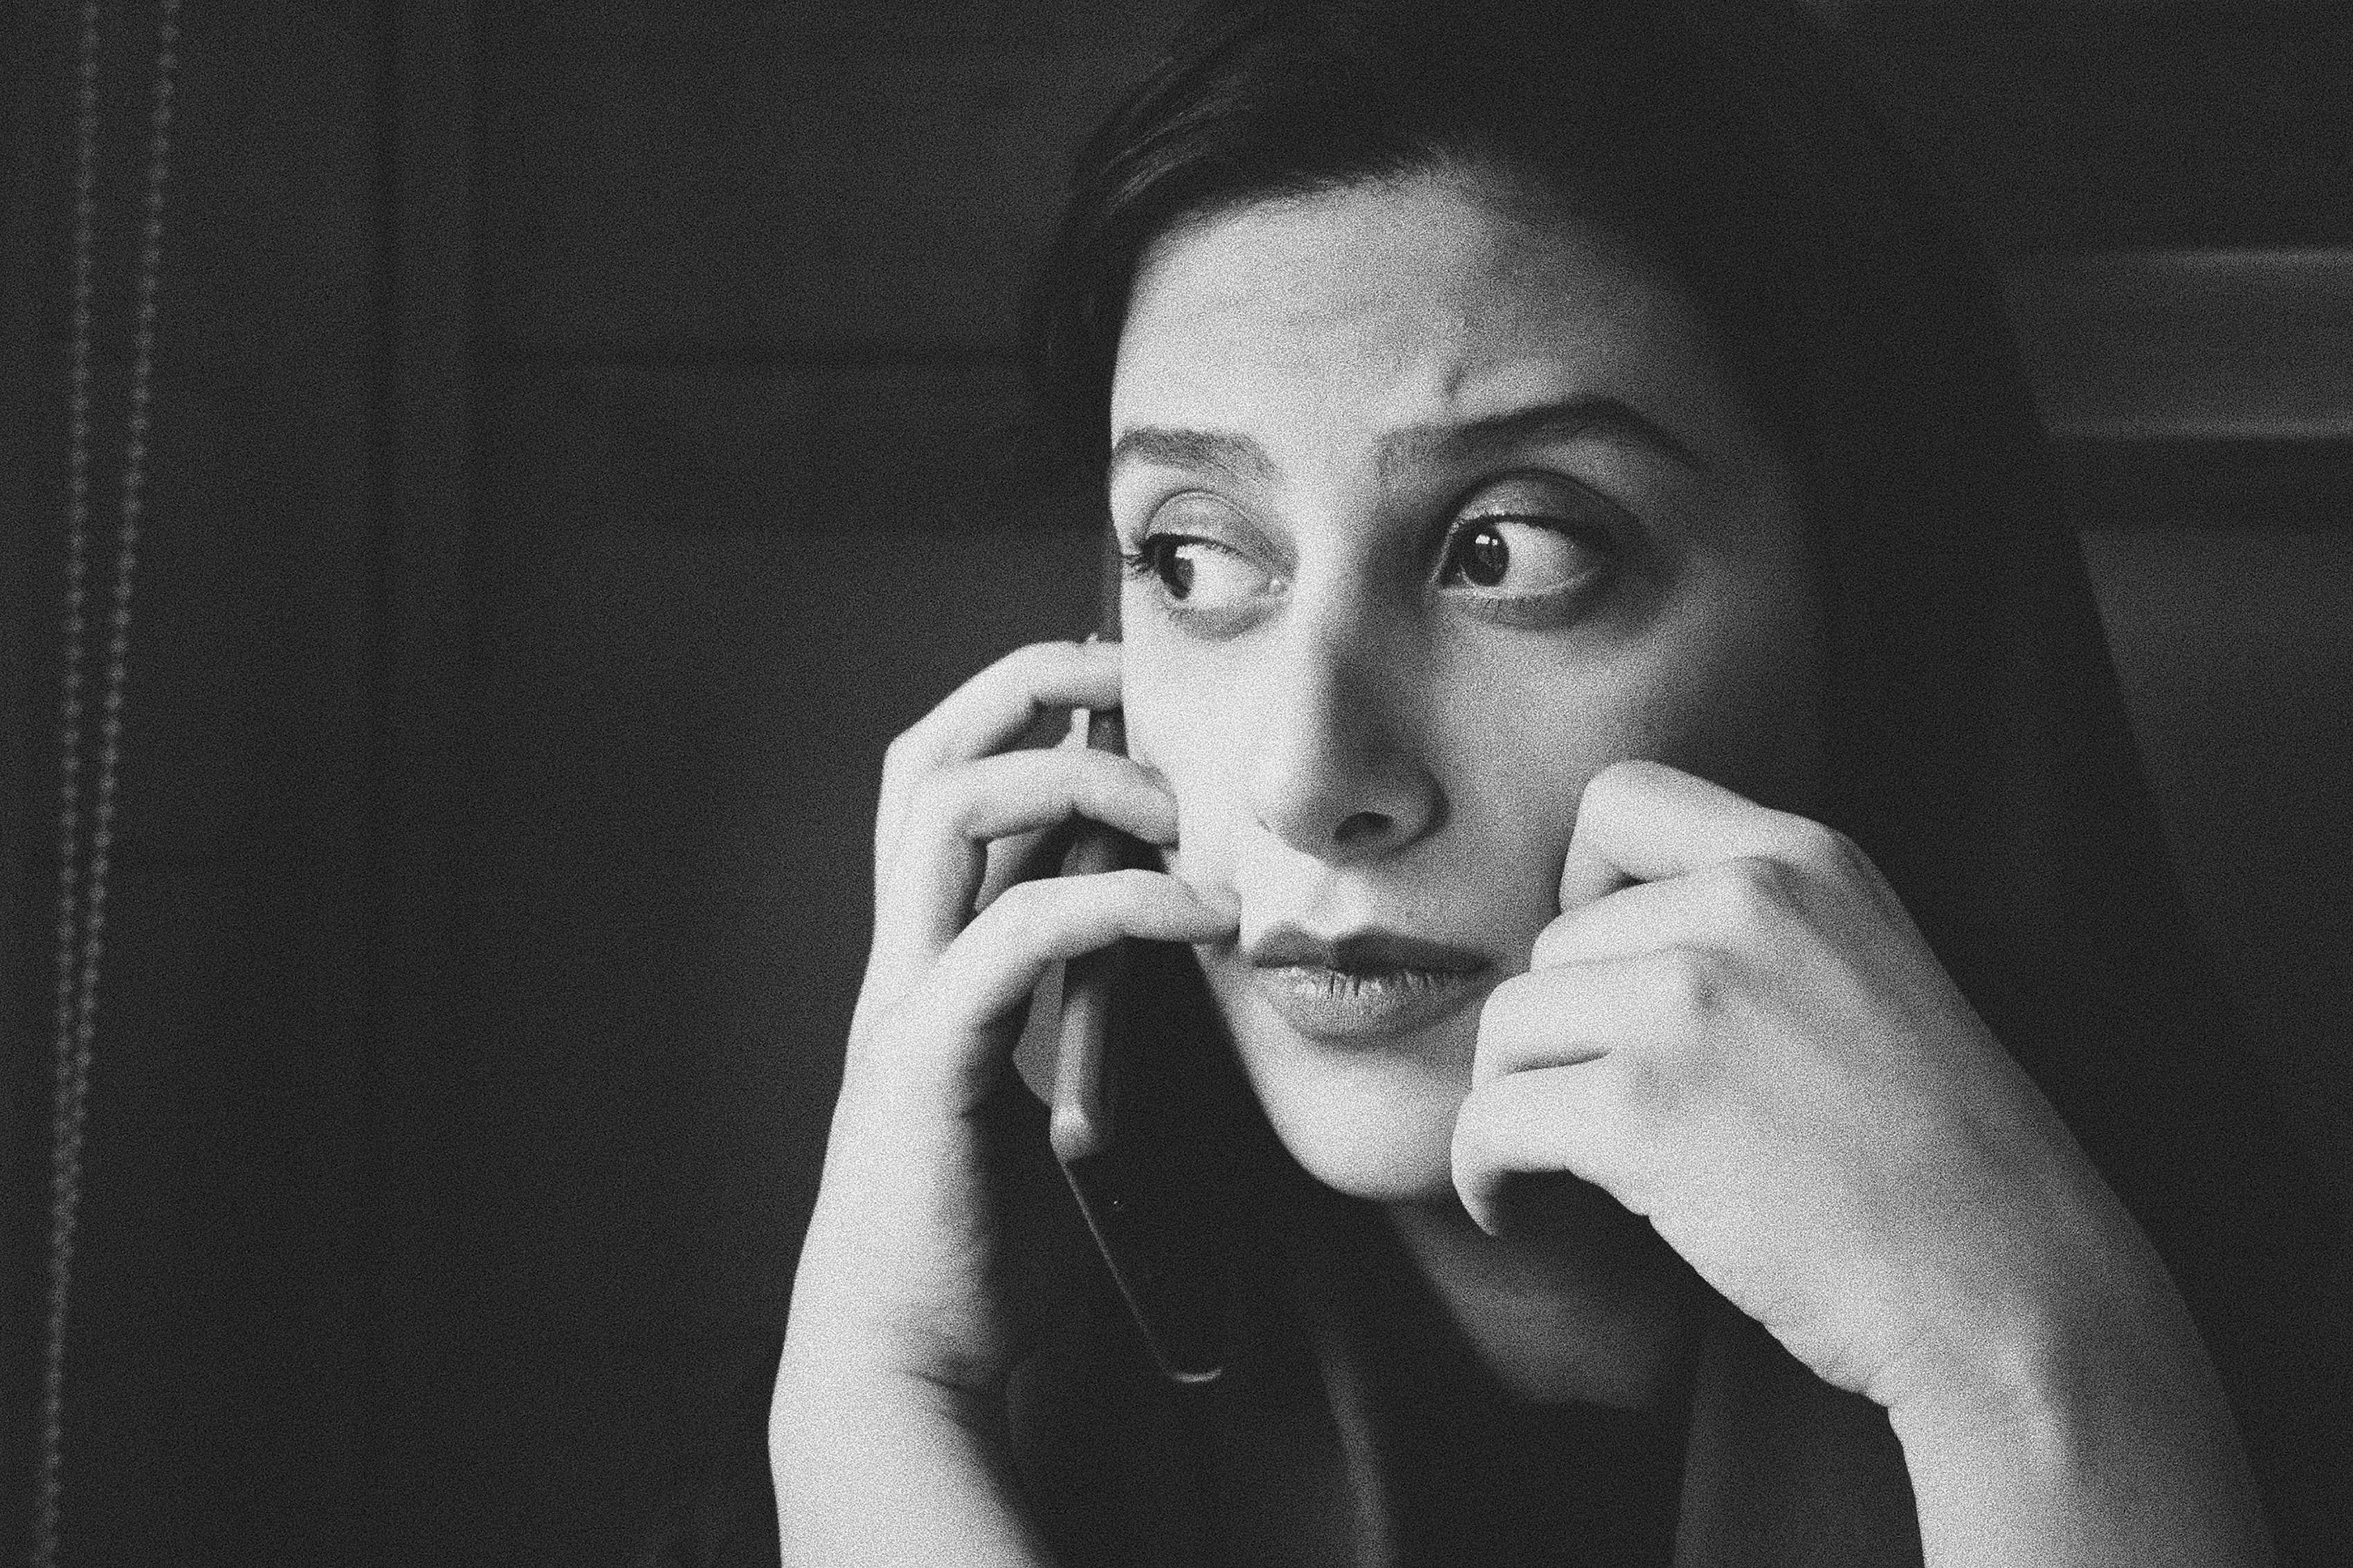 black and white image of woman looking anxious on mobile phone